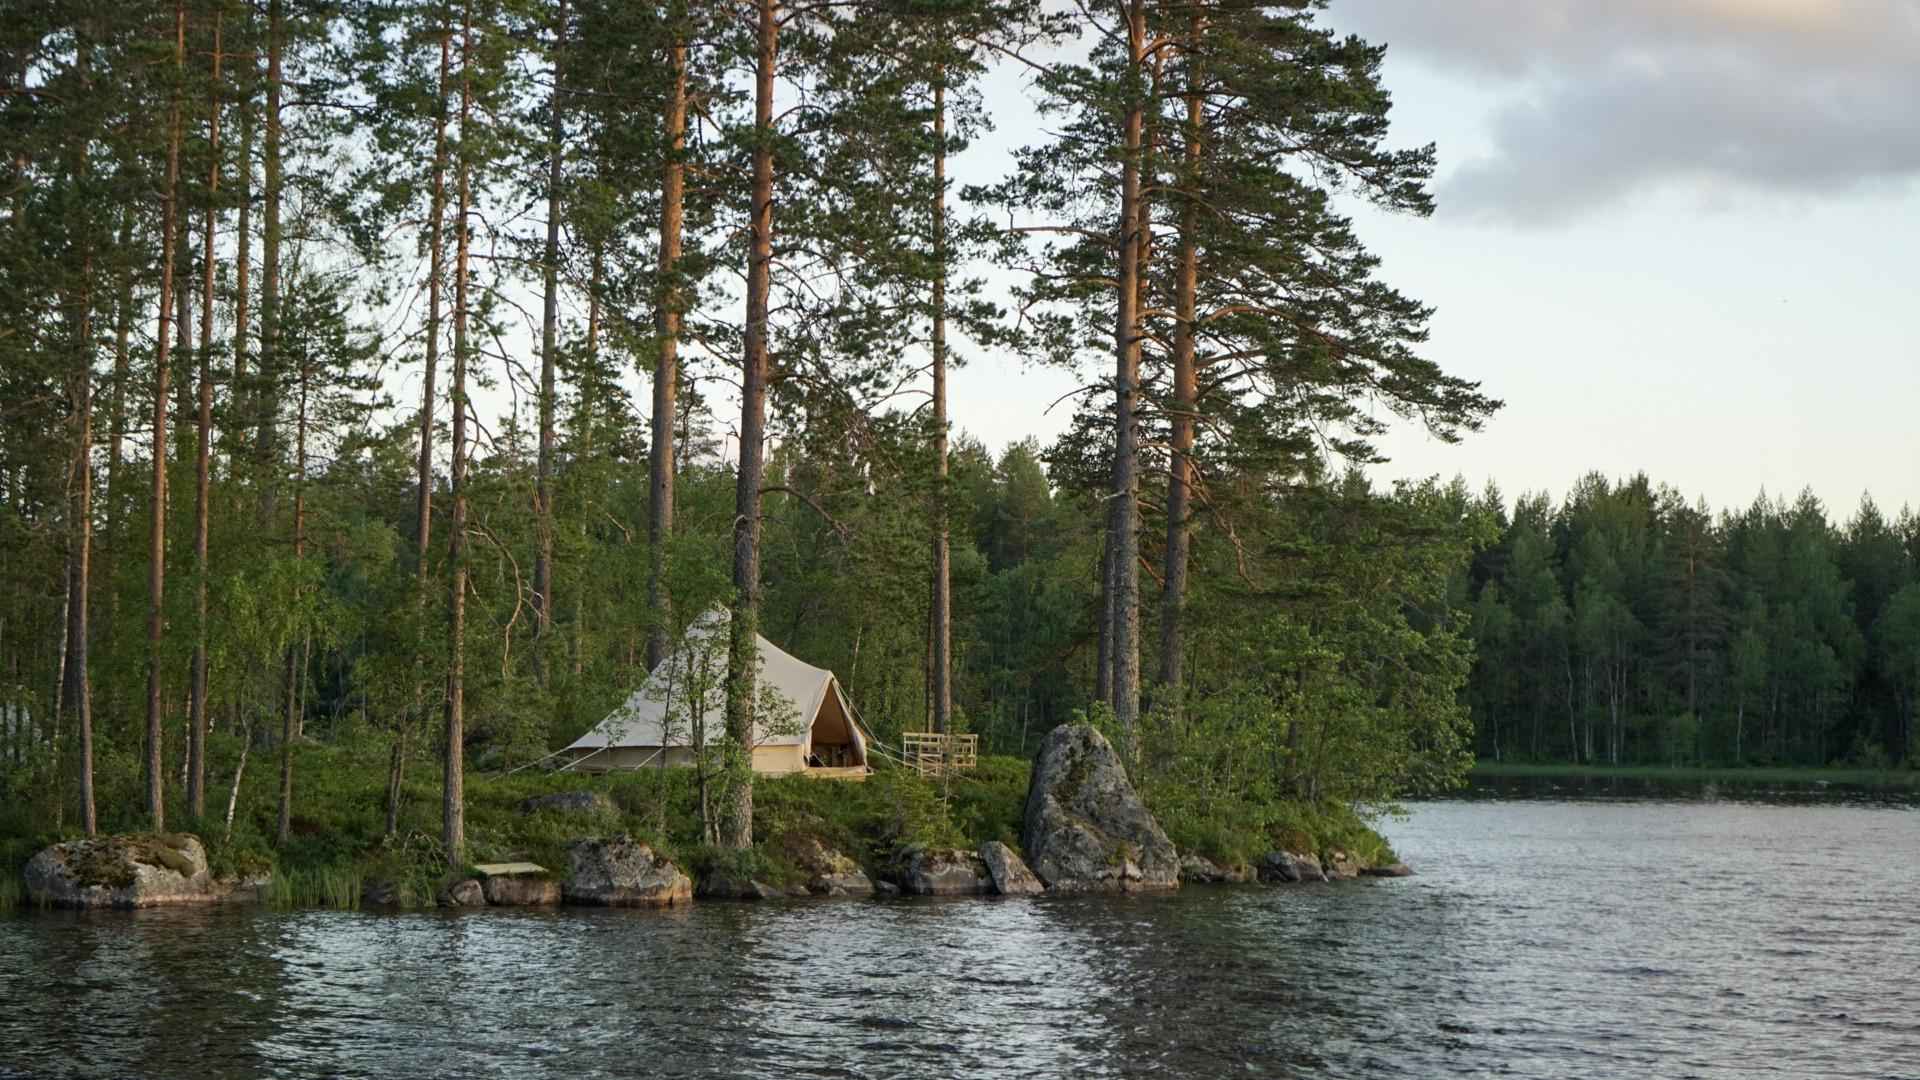 A luxury canvas tent by a lake in the forest in Värmland.